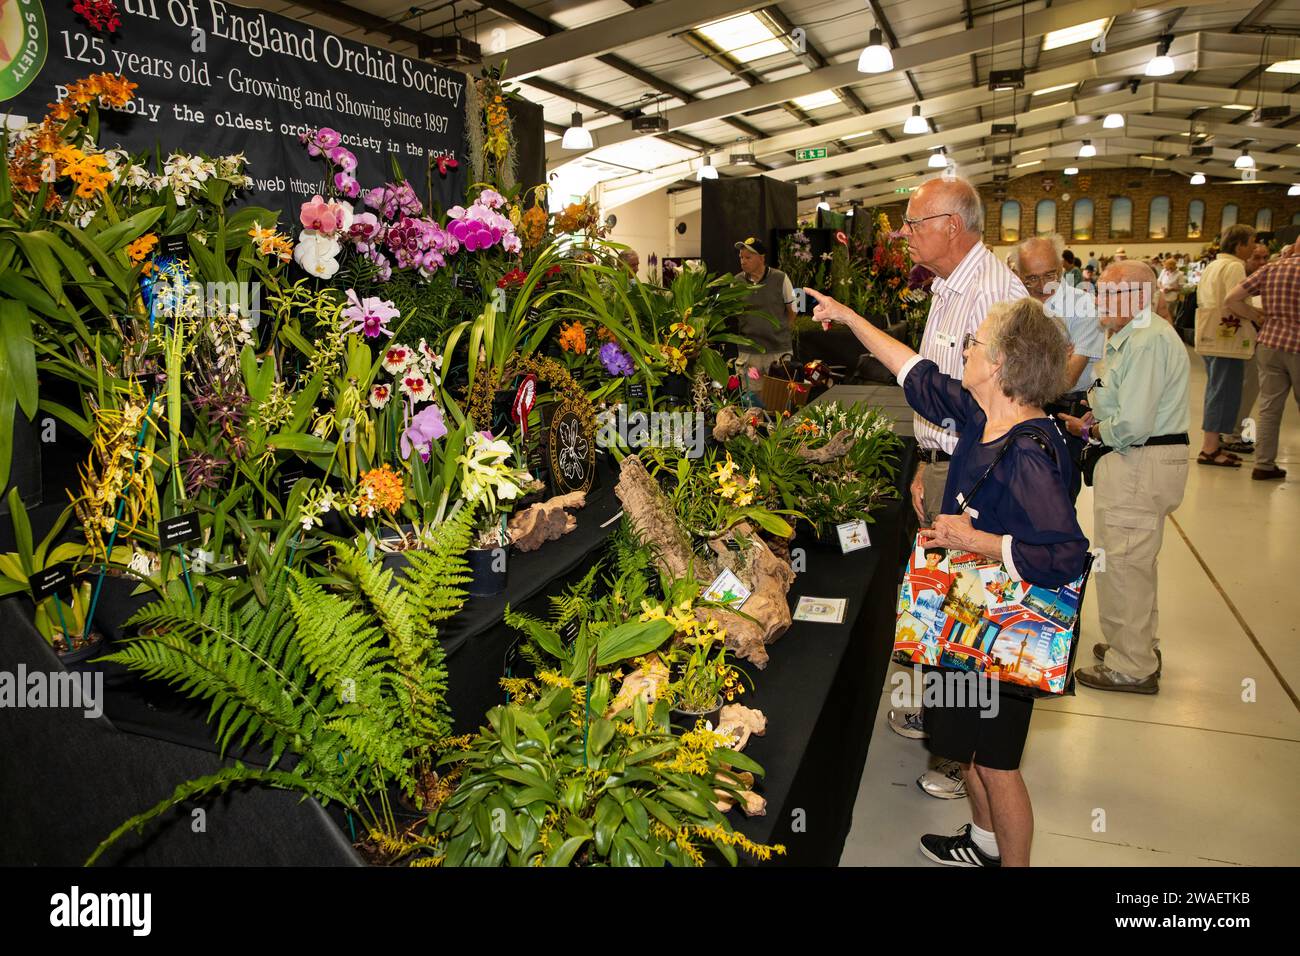 Royaume-Uni, Angleterre, Worcestershire, Malvern Wells, Royal 3 Counties Show, Severn Hall, Orchid Show, East of England Orchid Society stand Banque D'Images